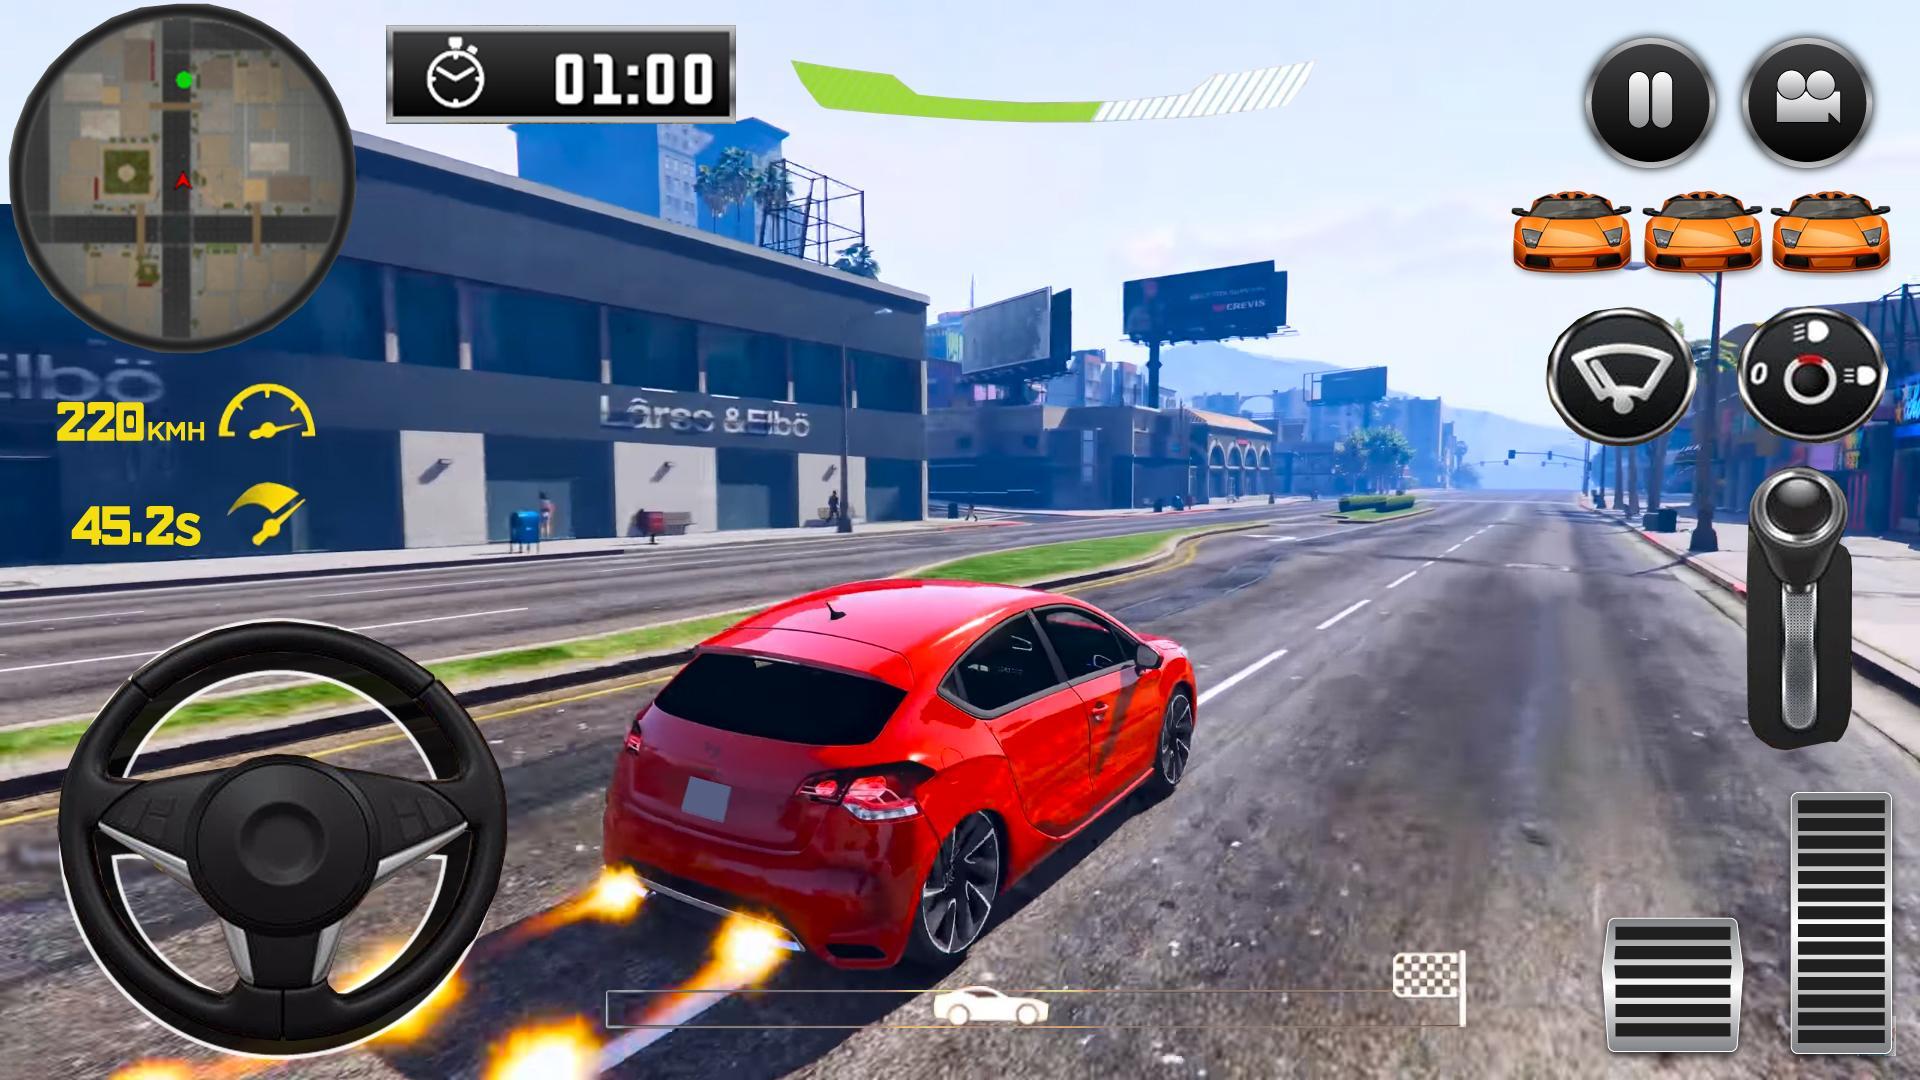 City Driving Citroen Car Simulator For Android Apk Download - how to use a c4 in vehicle simulator roblox